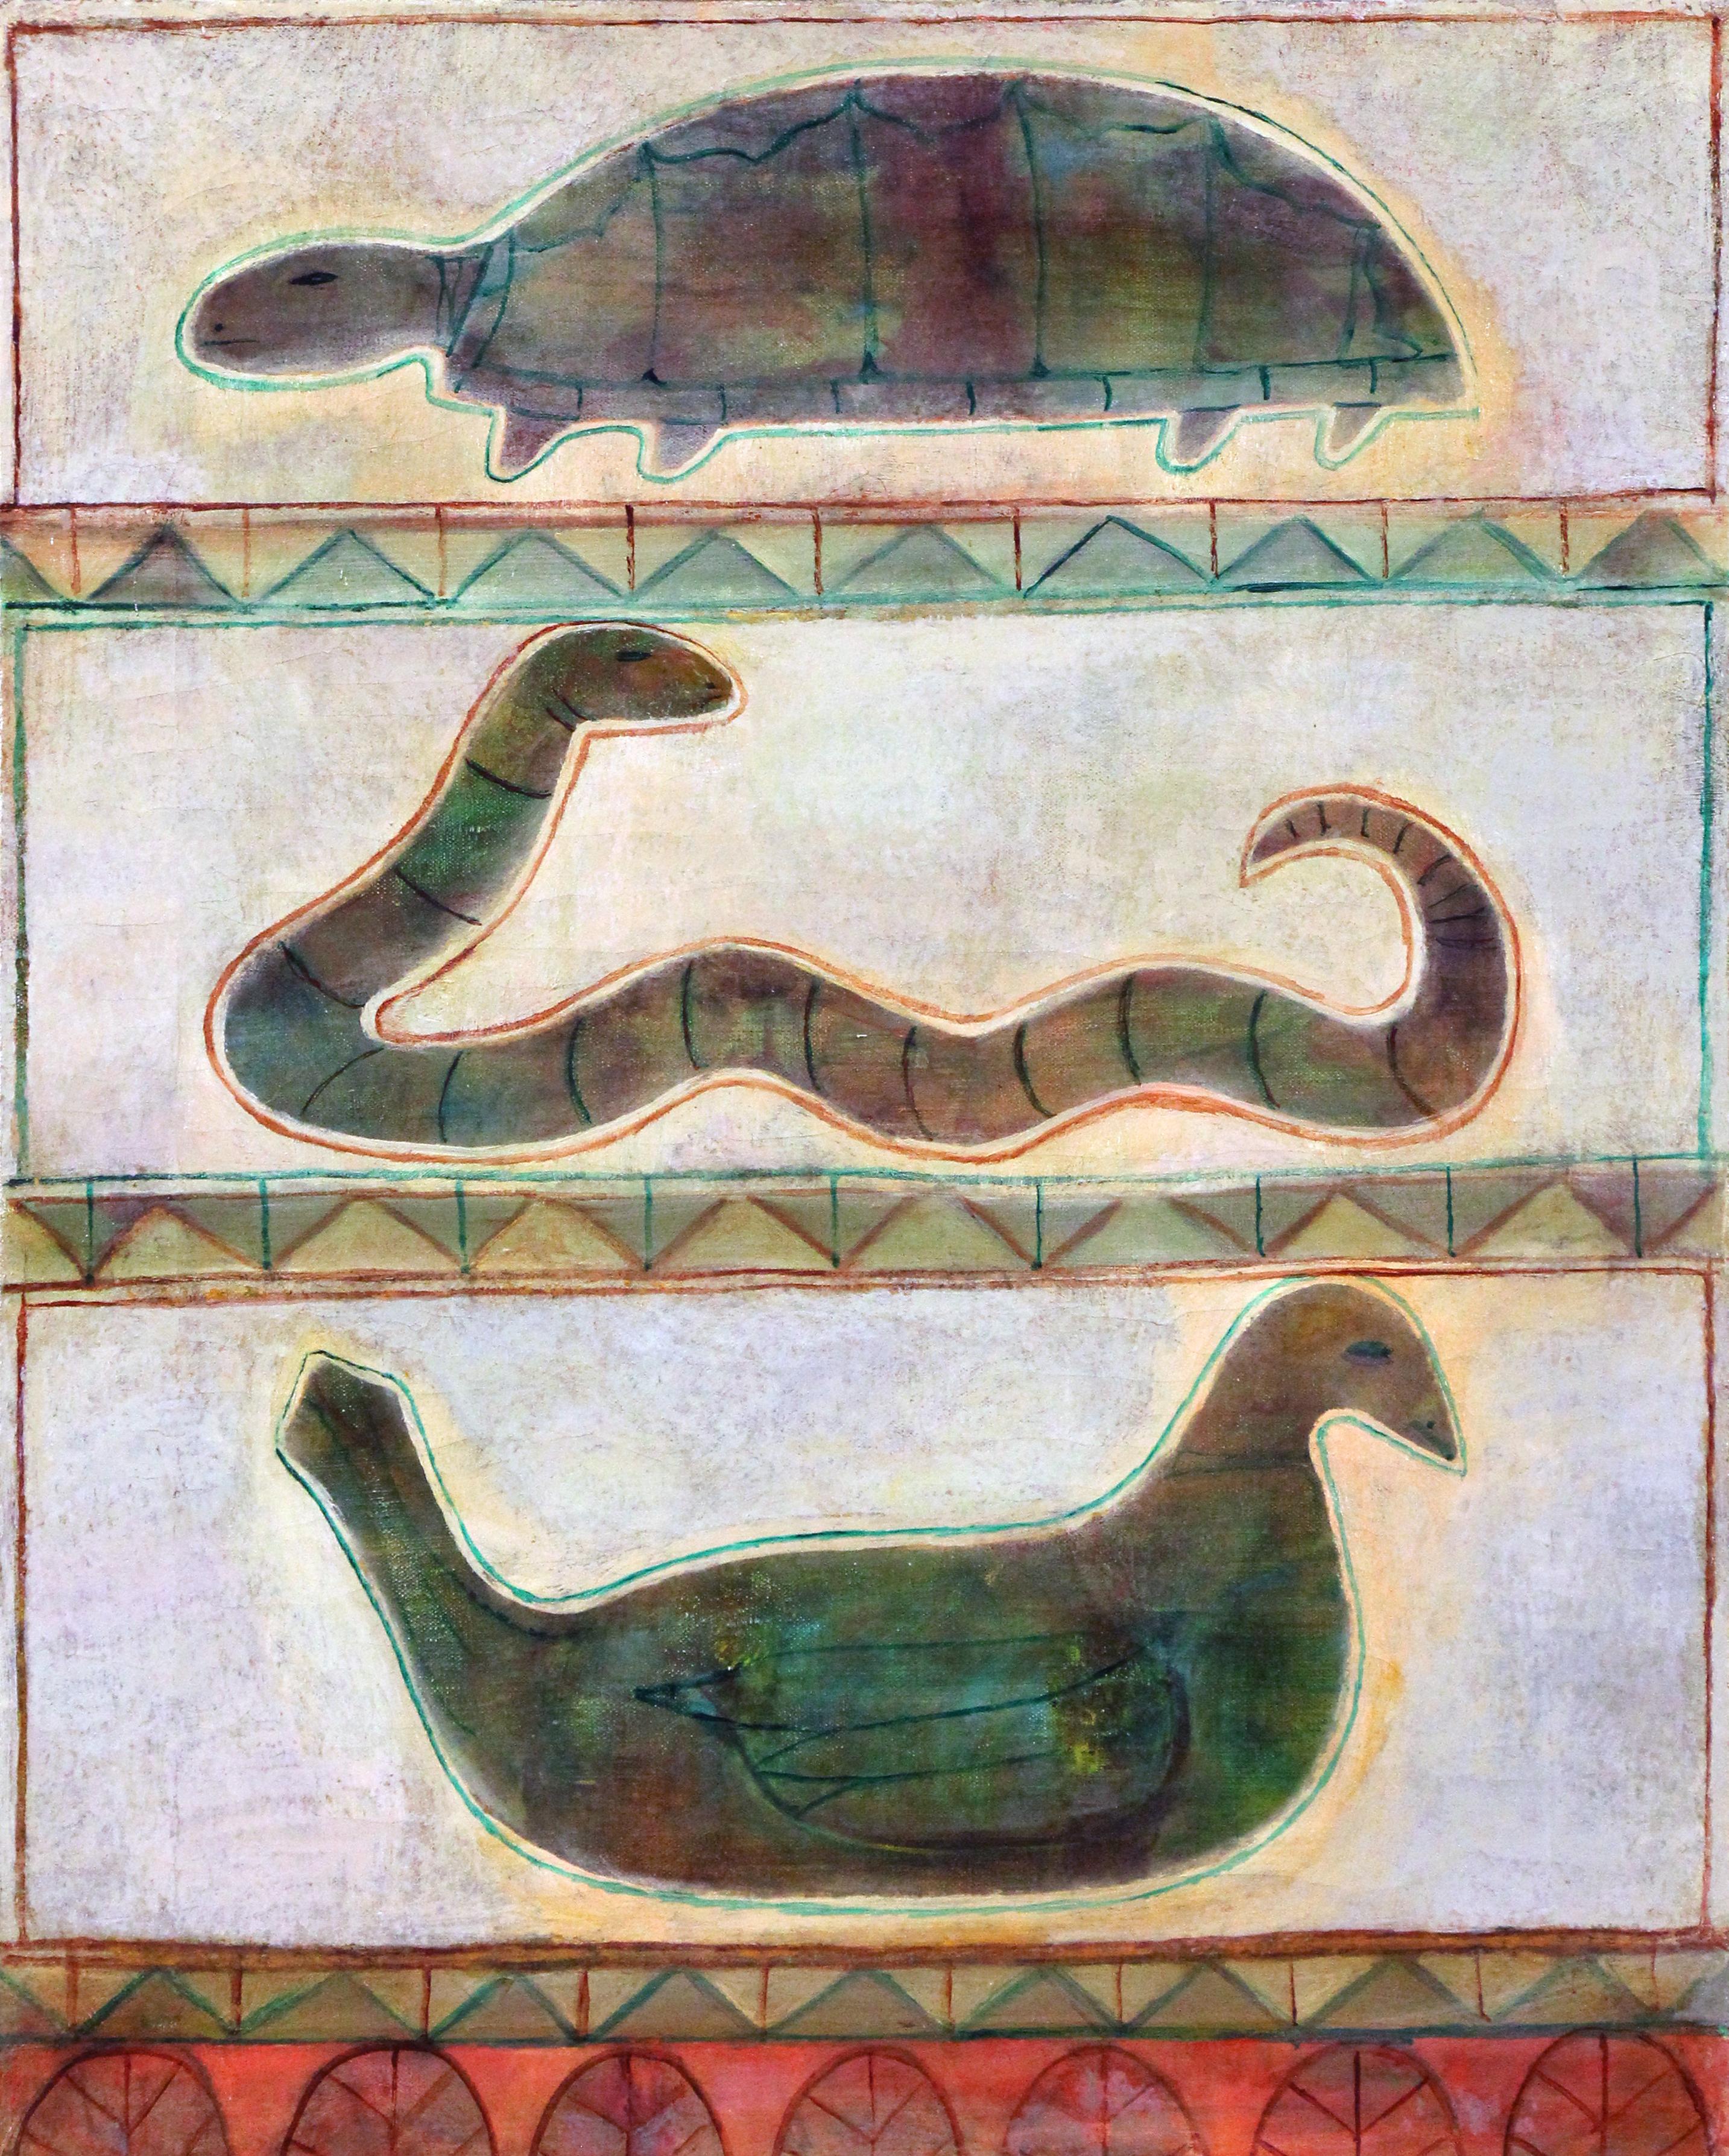 Turtle, Snake, and Dove, Spiritual and Cultural Commentary, Southwestern Art 